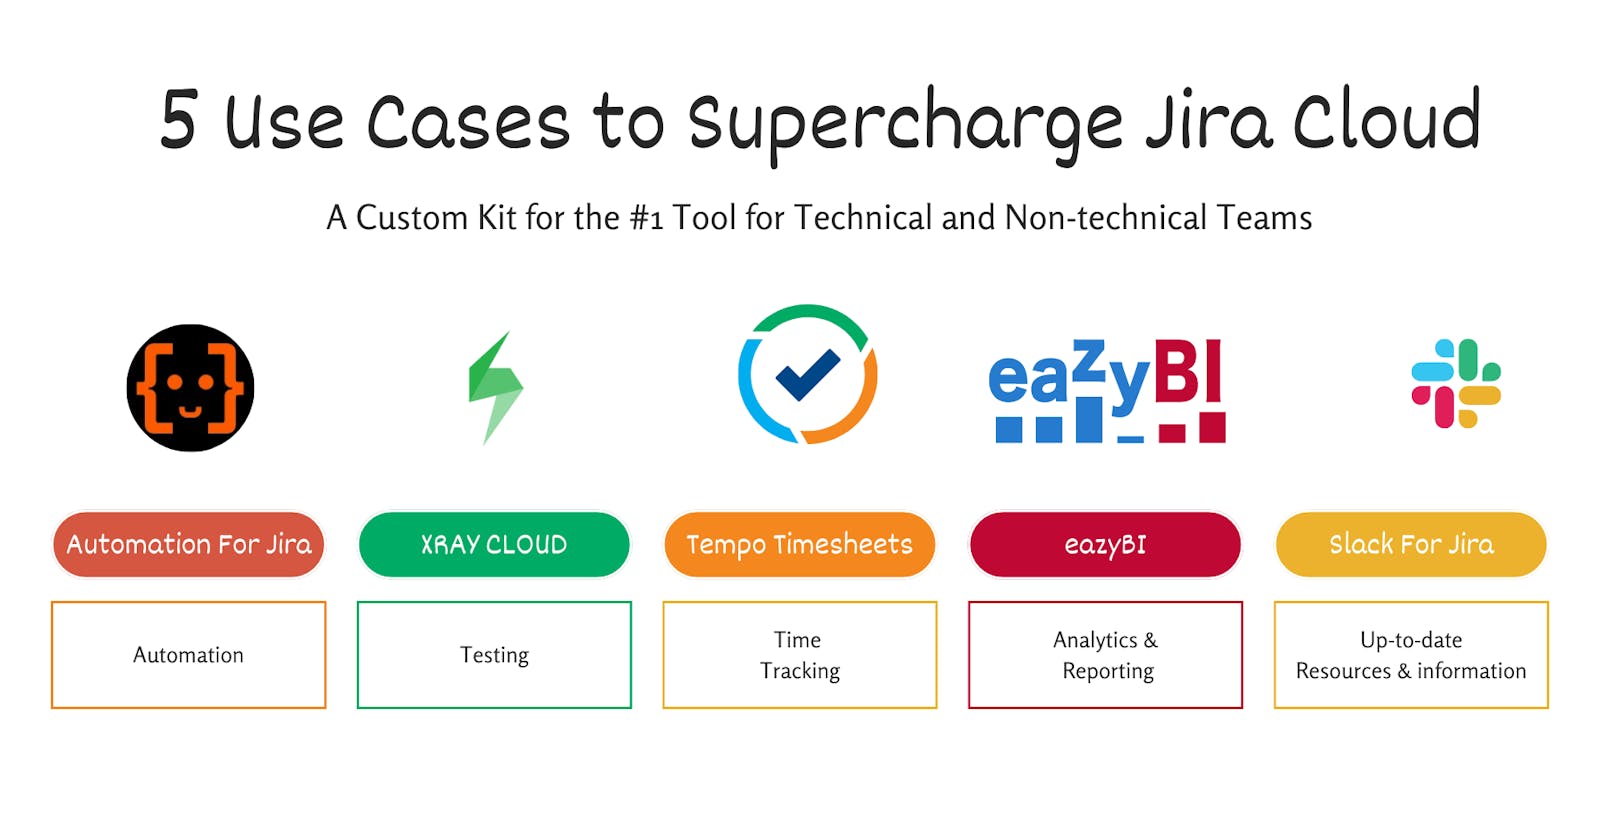 5 Use Cases to 
supercharge Your Jira Cloud Experience